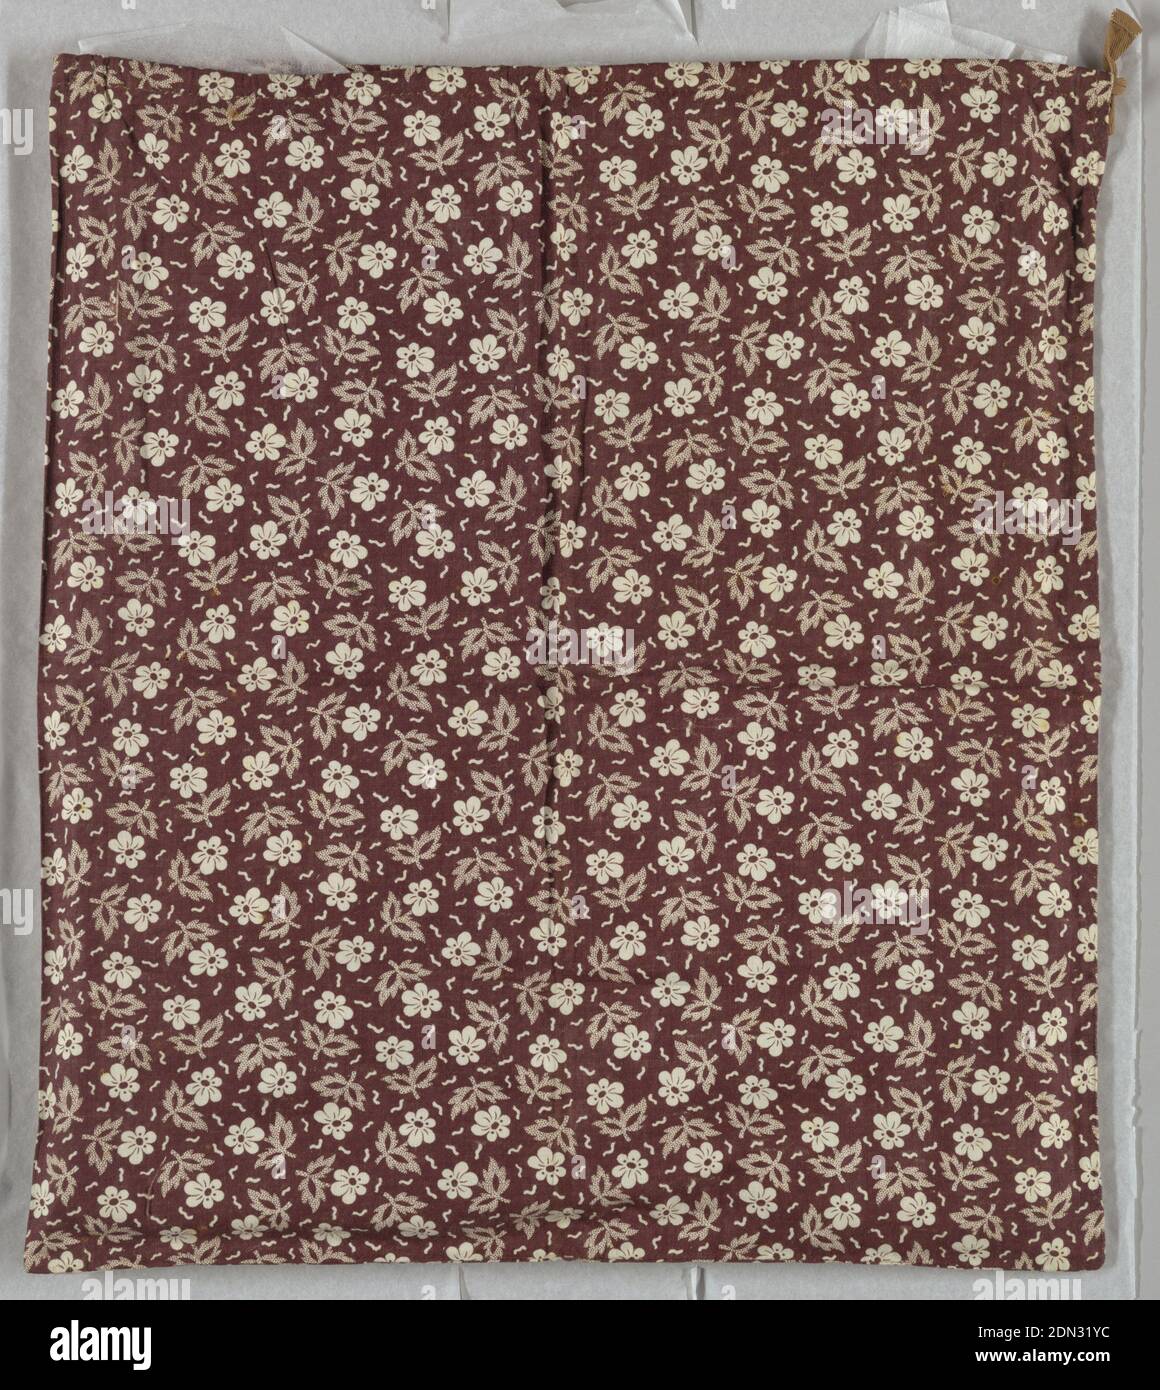 Pocket, Medium: cotton Technique: printed on plain weave, Pocket with a drawstring closure. Pattern is a small allover floral design in brown and white., USA, ca. 1870, costume & accessories, Pocket Stock Photo